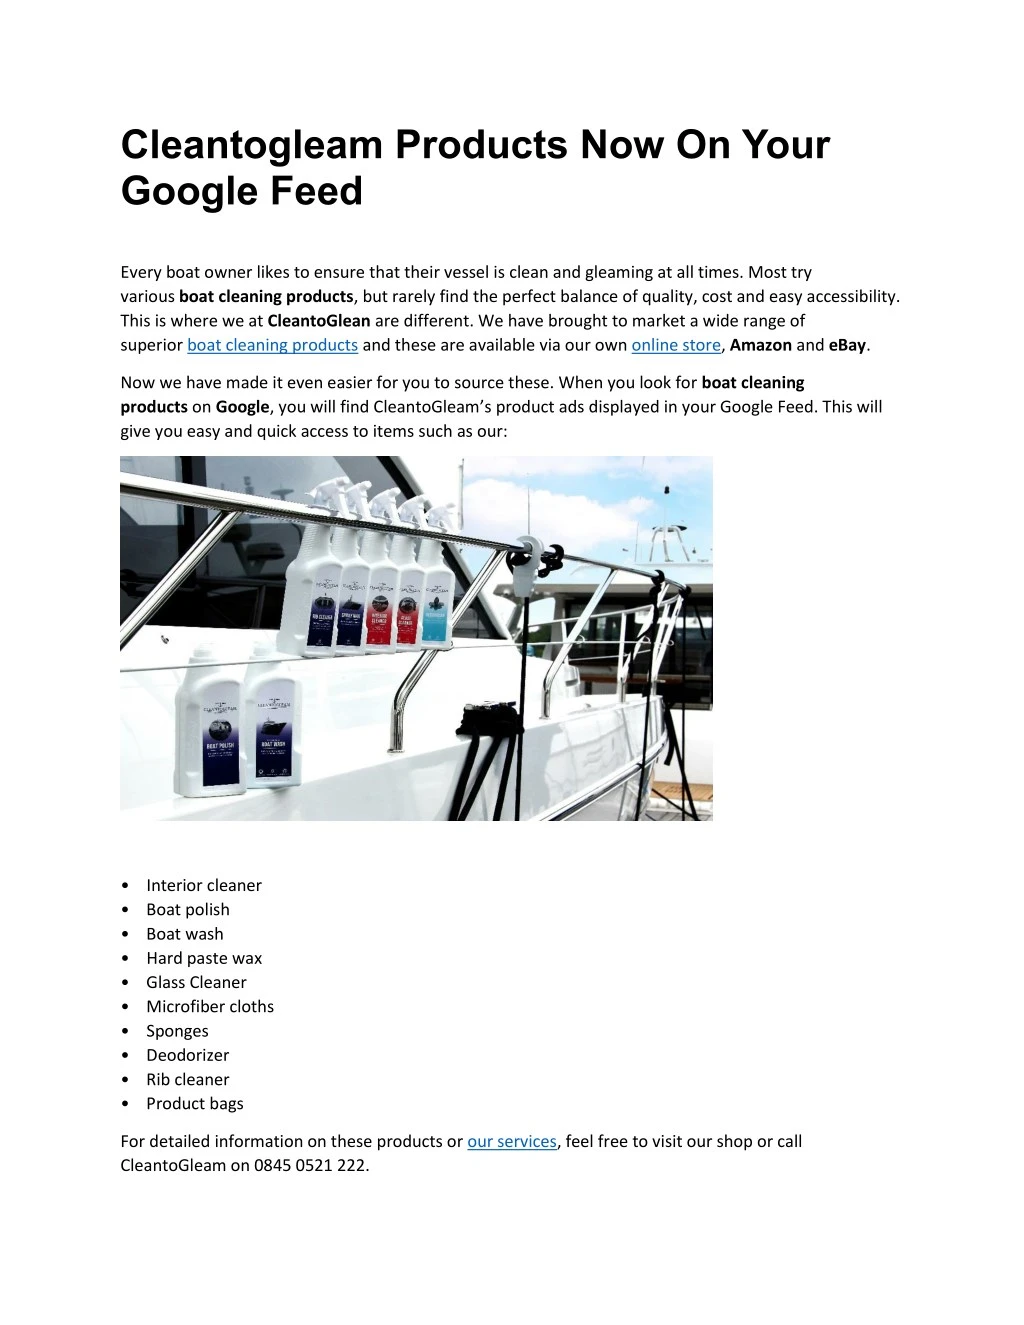 cleantogleam products now on your google feed